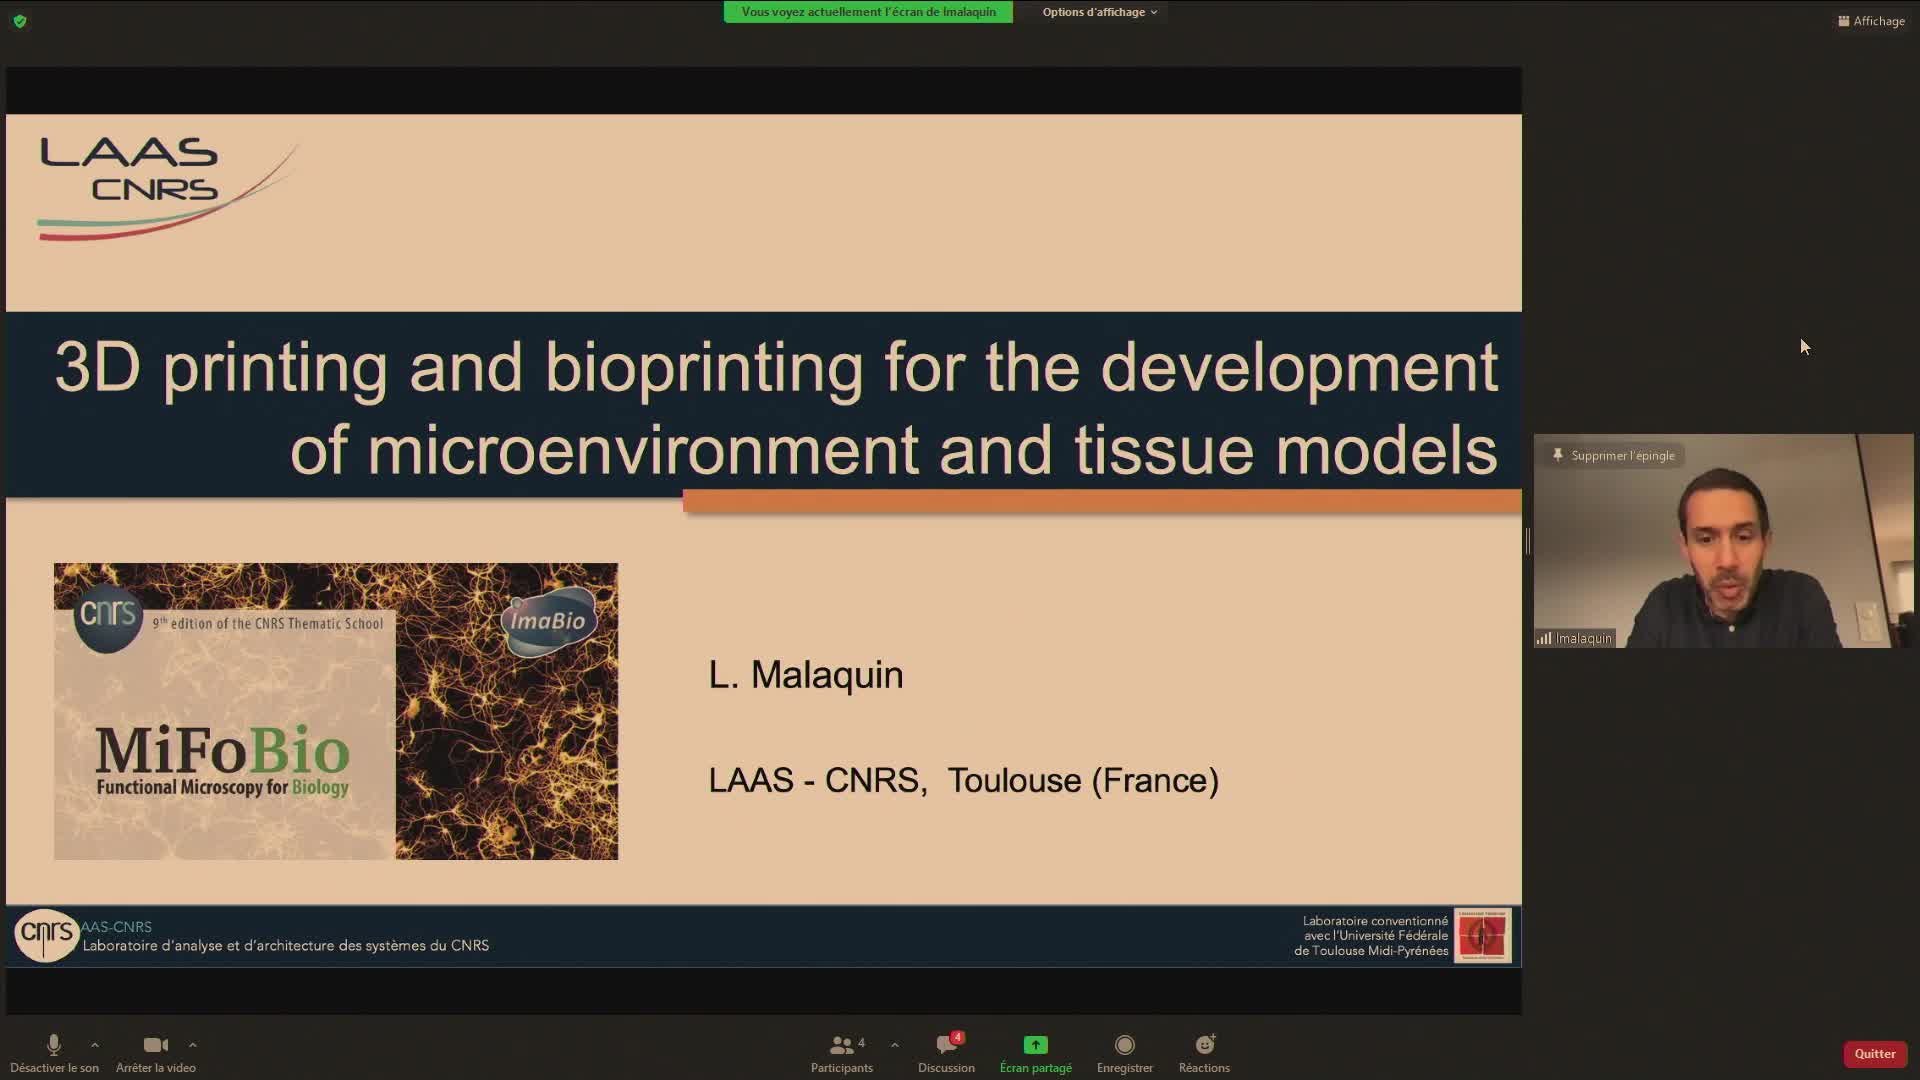 3D printing and bioprinting for the development of microenvironment and tissue models - Laurent Malaquin